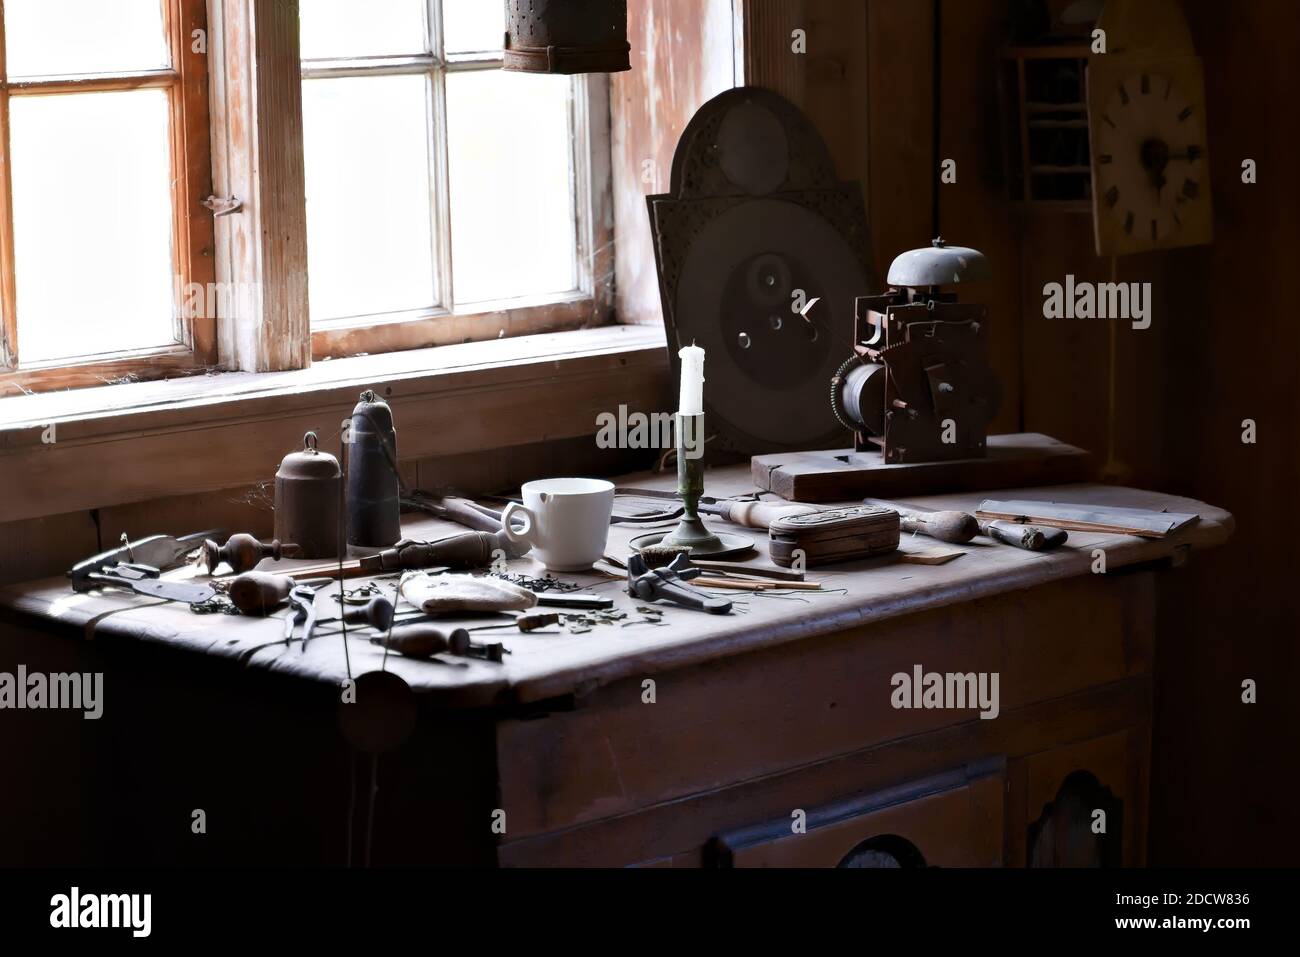 Clockmakers workshop with tools and clock parts strewn on the table with natural sunlight streaming in through the window. Stock Photo